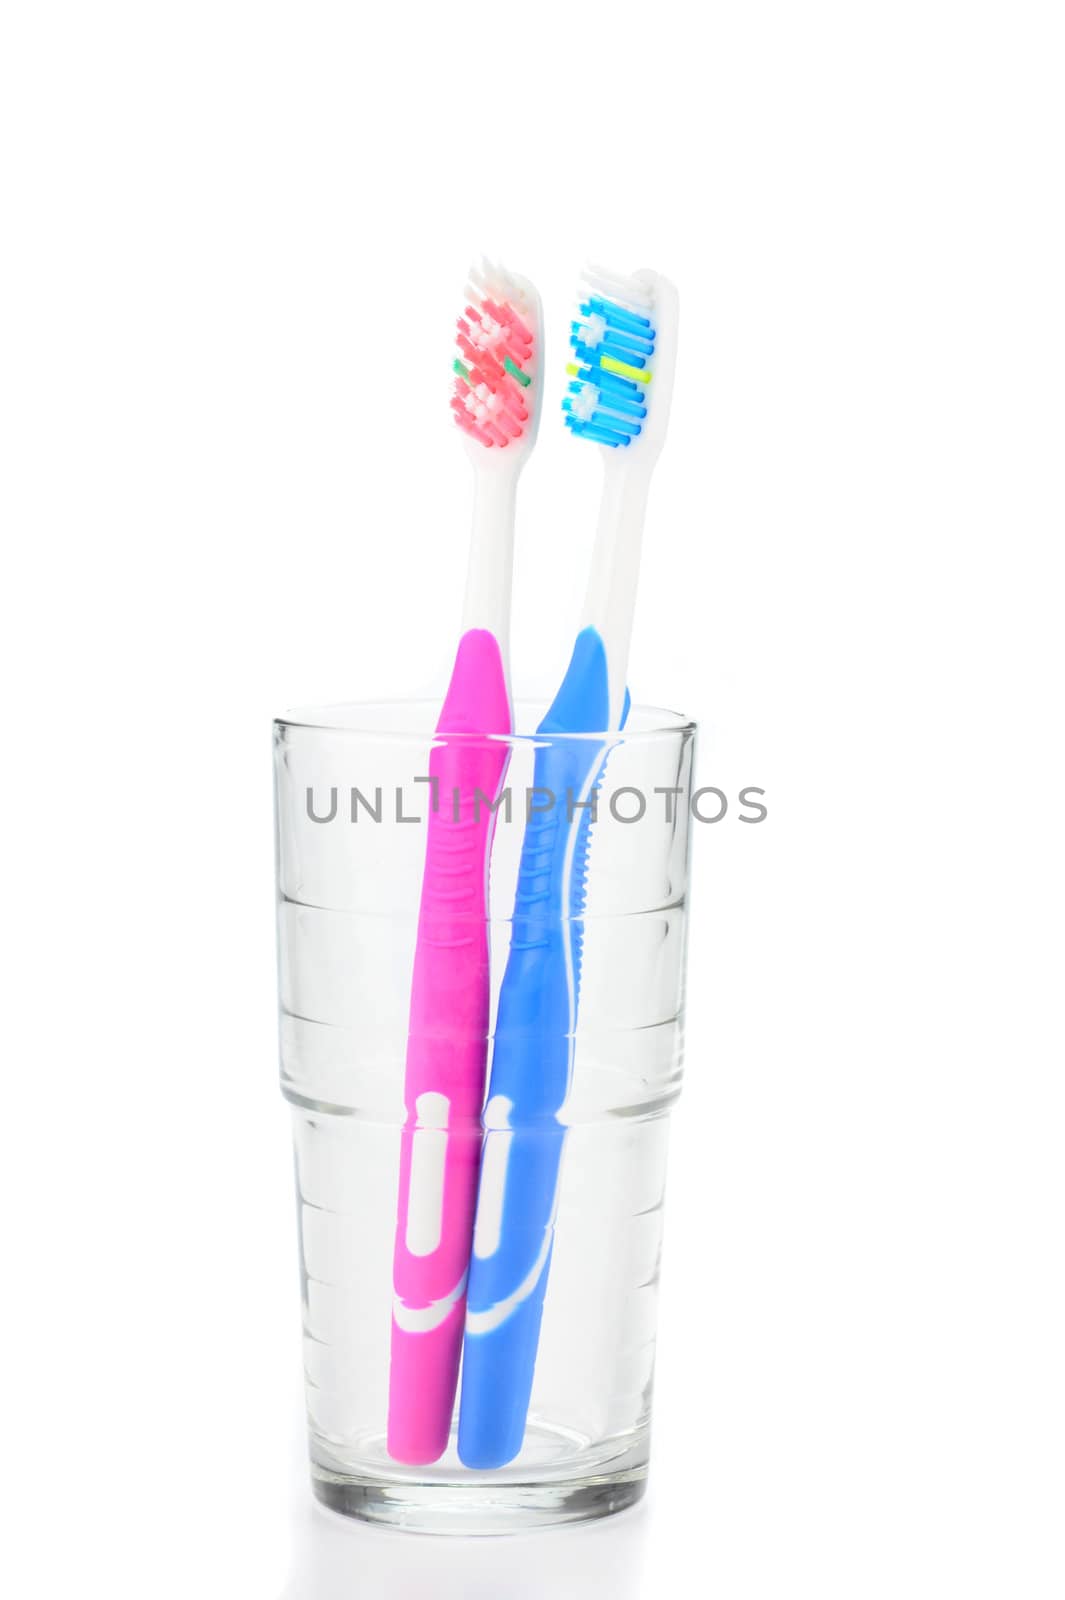 Pink and blue toothbrushes in a water glass.